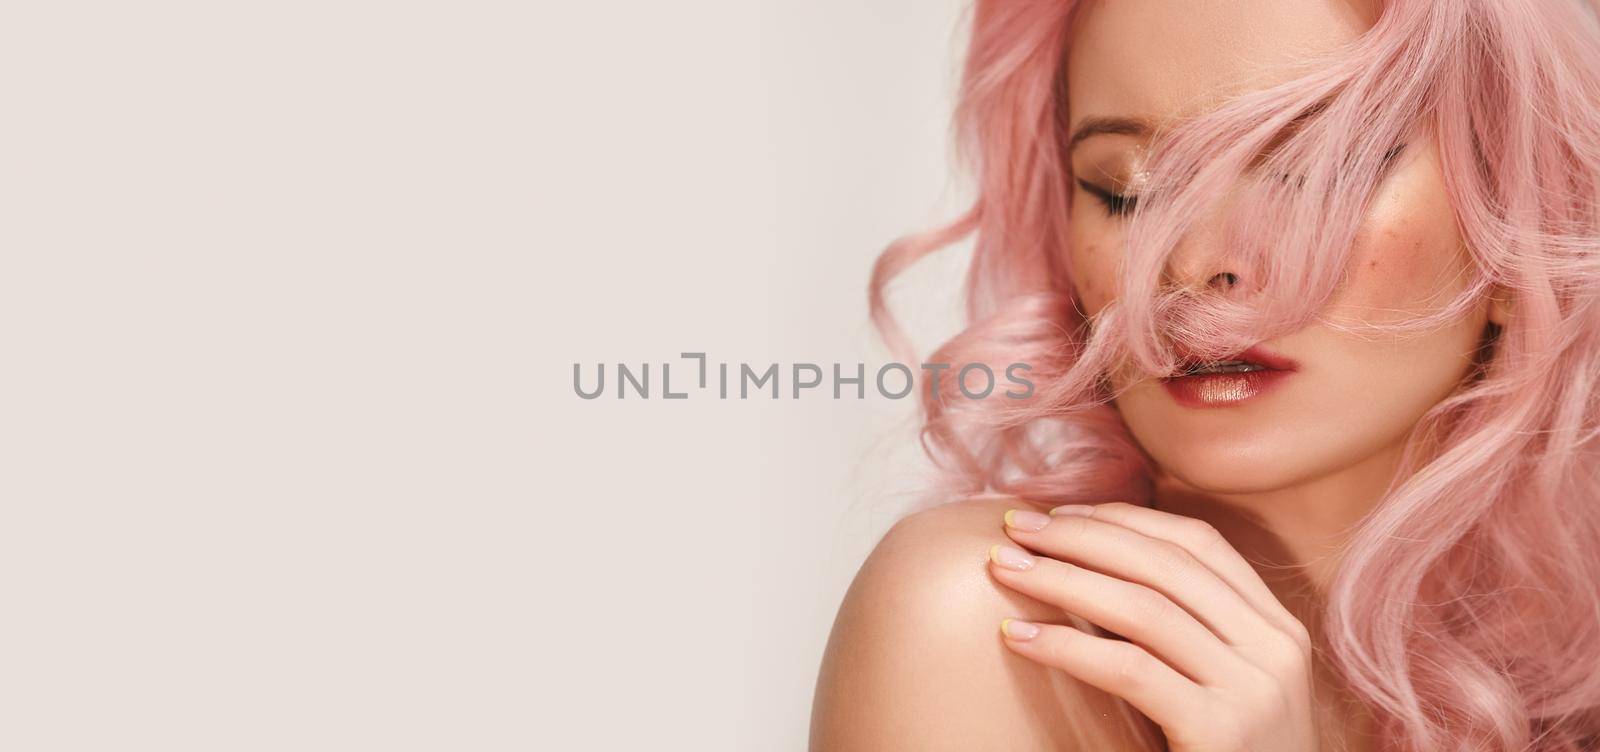 Soft-Girl Style with Trend Pink Flying Hair, Fashion Make-up. Woman Face with Fake Freckles and Rose Colored Hairstyle. Blonde Female Model with perfect Fresh Clean Skin, Blush Rouge